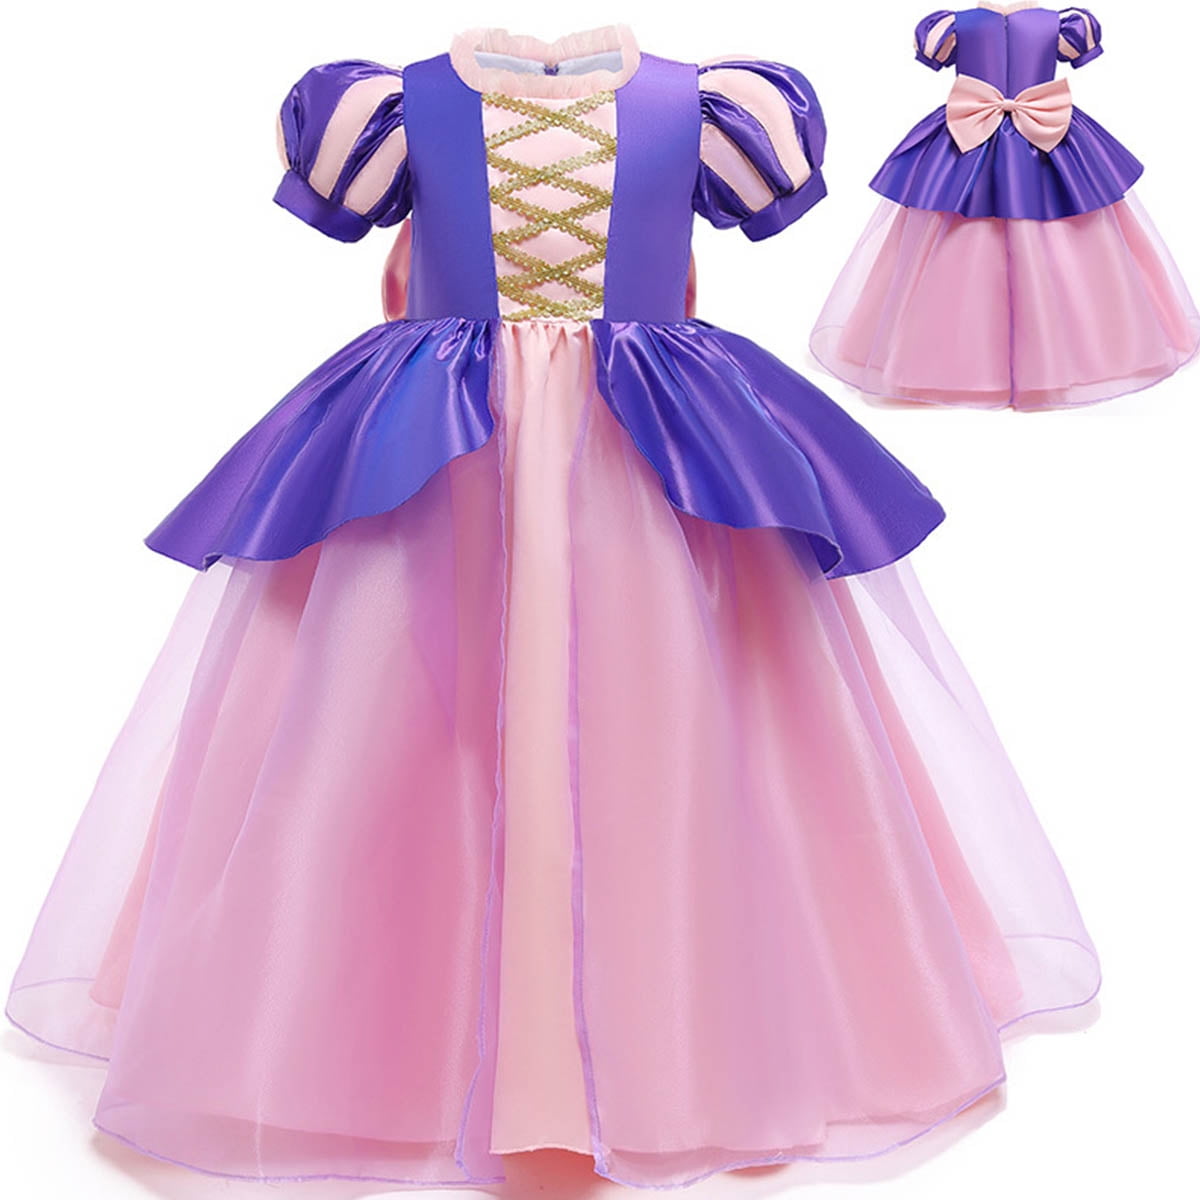 Kids Christmas Gifts Sofia The First Costume Girls Princess Gown Fancy Dress O62